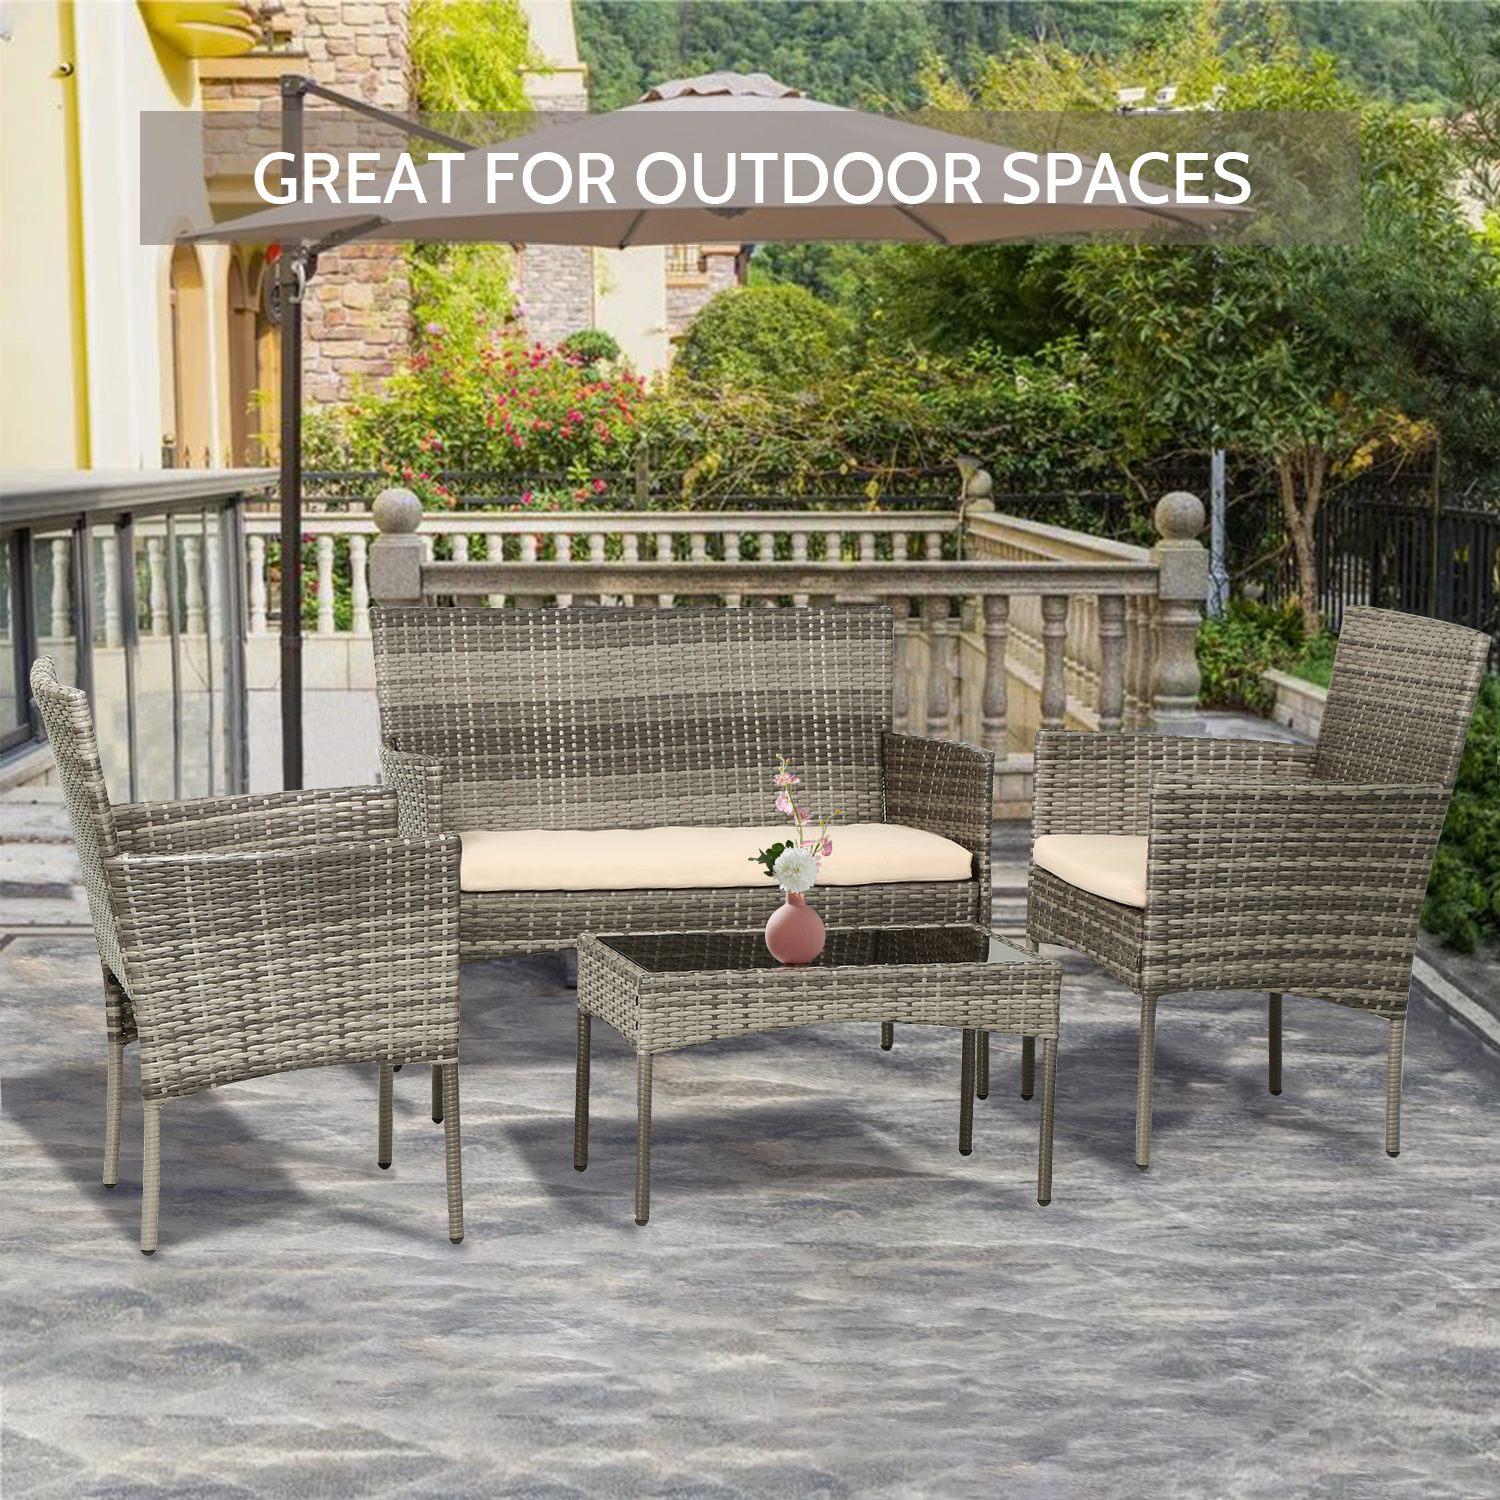 Patio Conversation Set 4 Pieces Patio Furniture Set Wicker with Rattan Chair Loveseats Coffee Table for Outdoor Indoor Garden Backyard Porch Poolside Balcony,Gray Wicker/Khaki Cushions - image 2 of 7